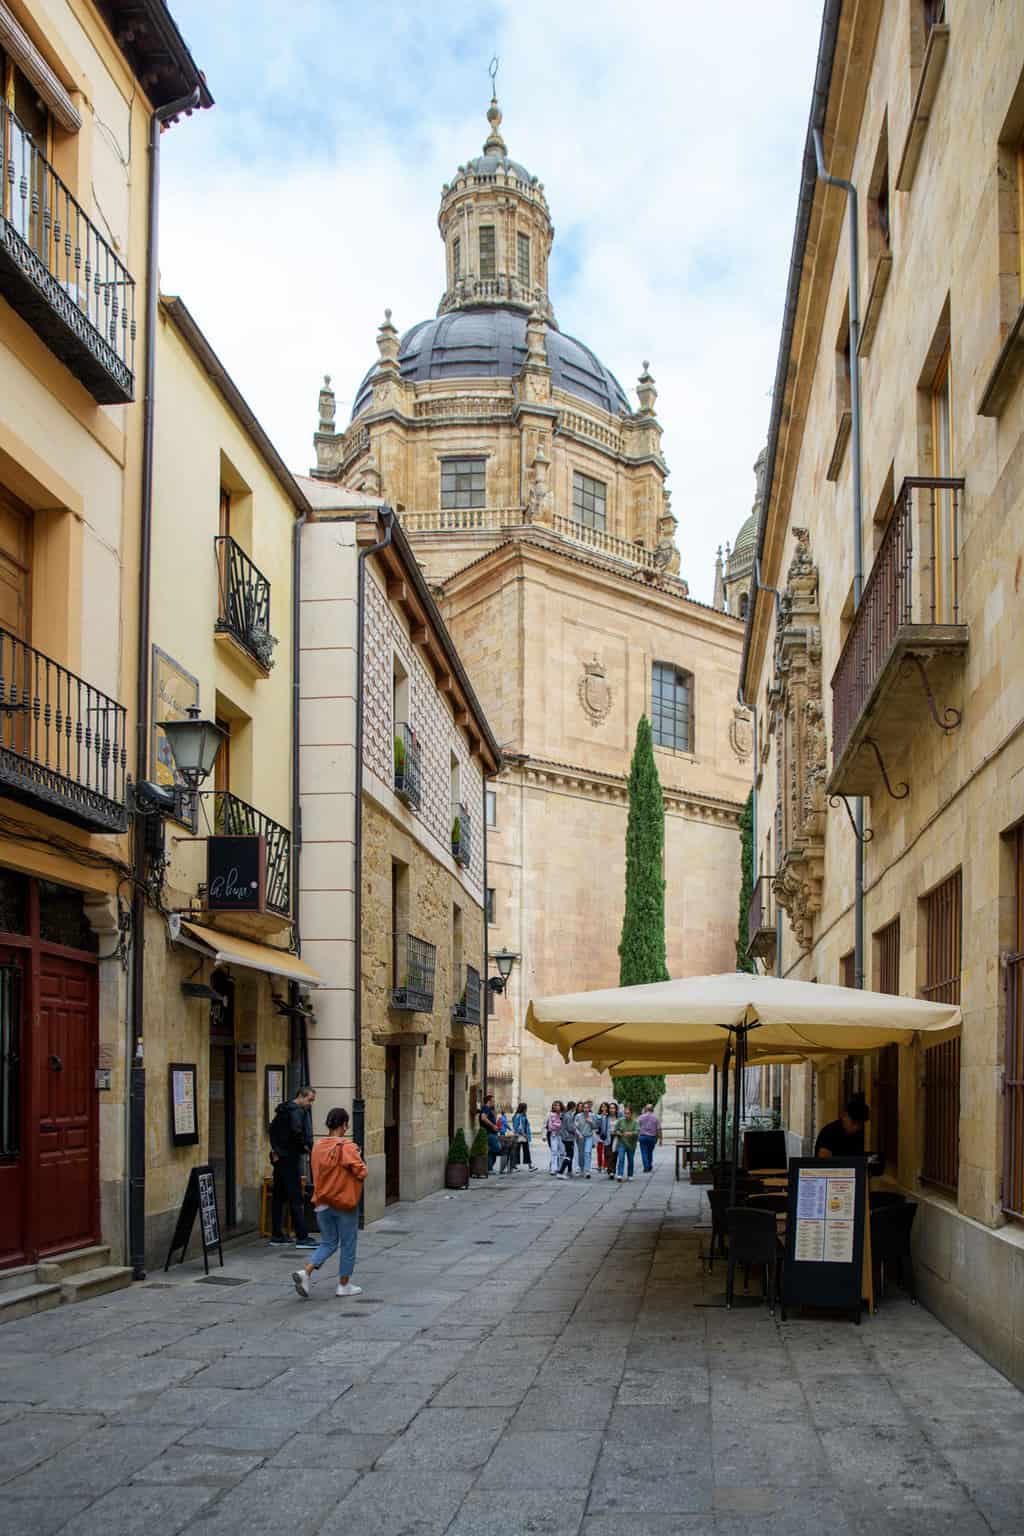 Narrpw street in Salamanca with domed cathedral at the end. 